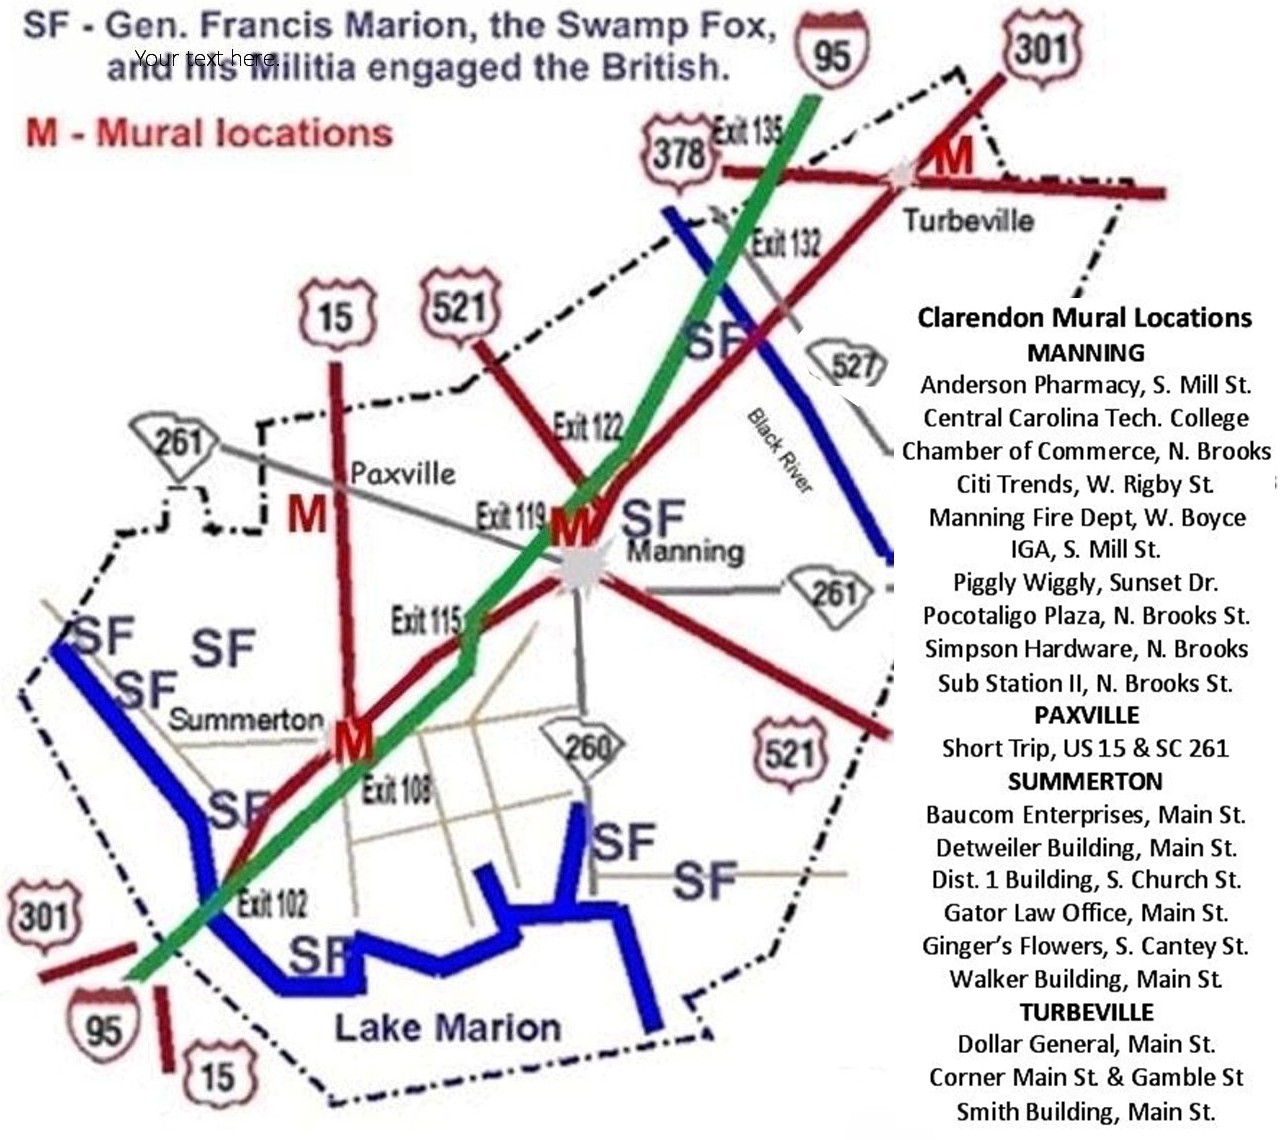 Francis Marion, Swamp Fox Murals are marked in red in 4 towns in Clarendon County, SC